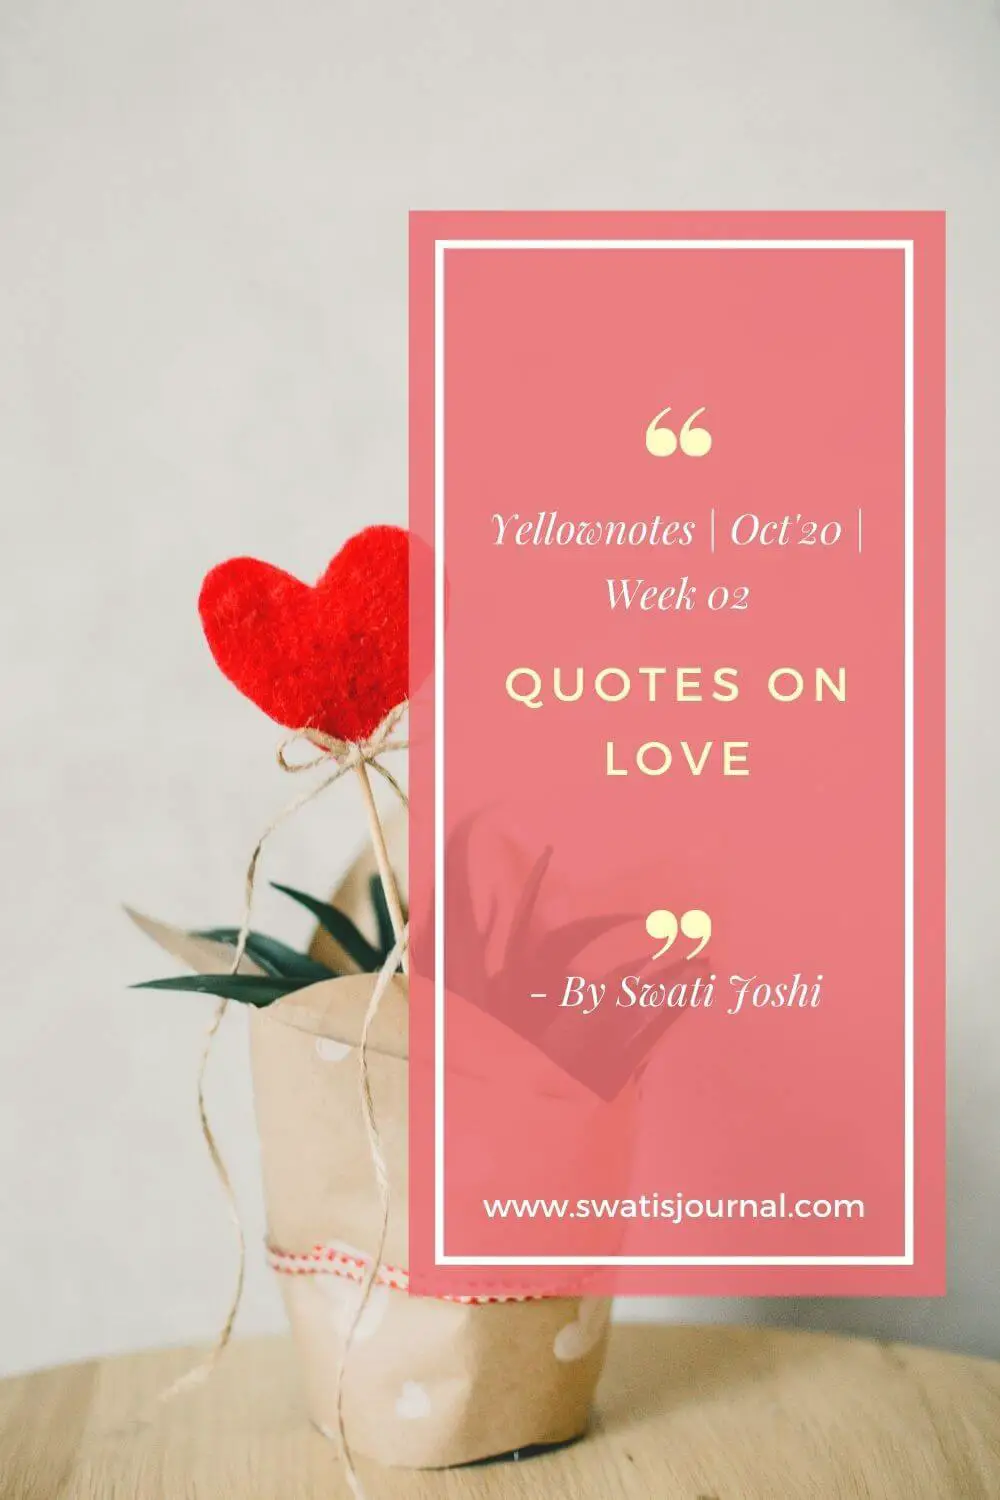 Yellownotes – Quotes on Love | Quote for today | October 2020 | Week 02 5 (1)